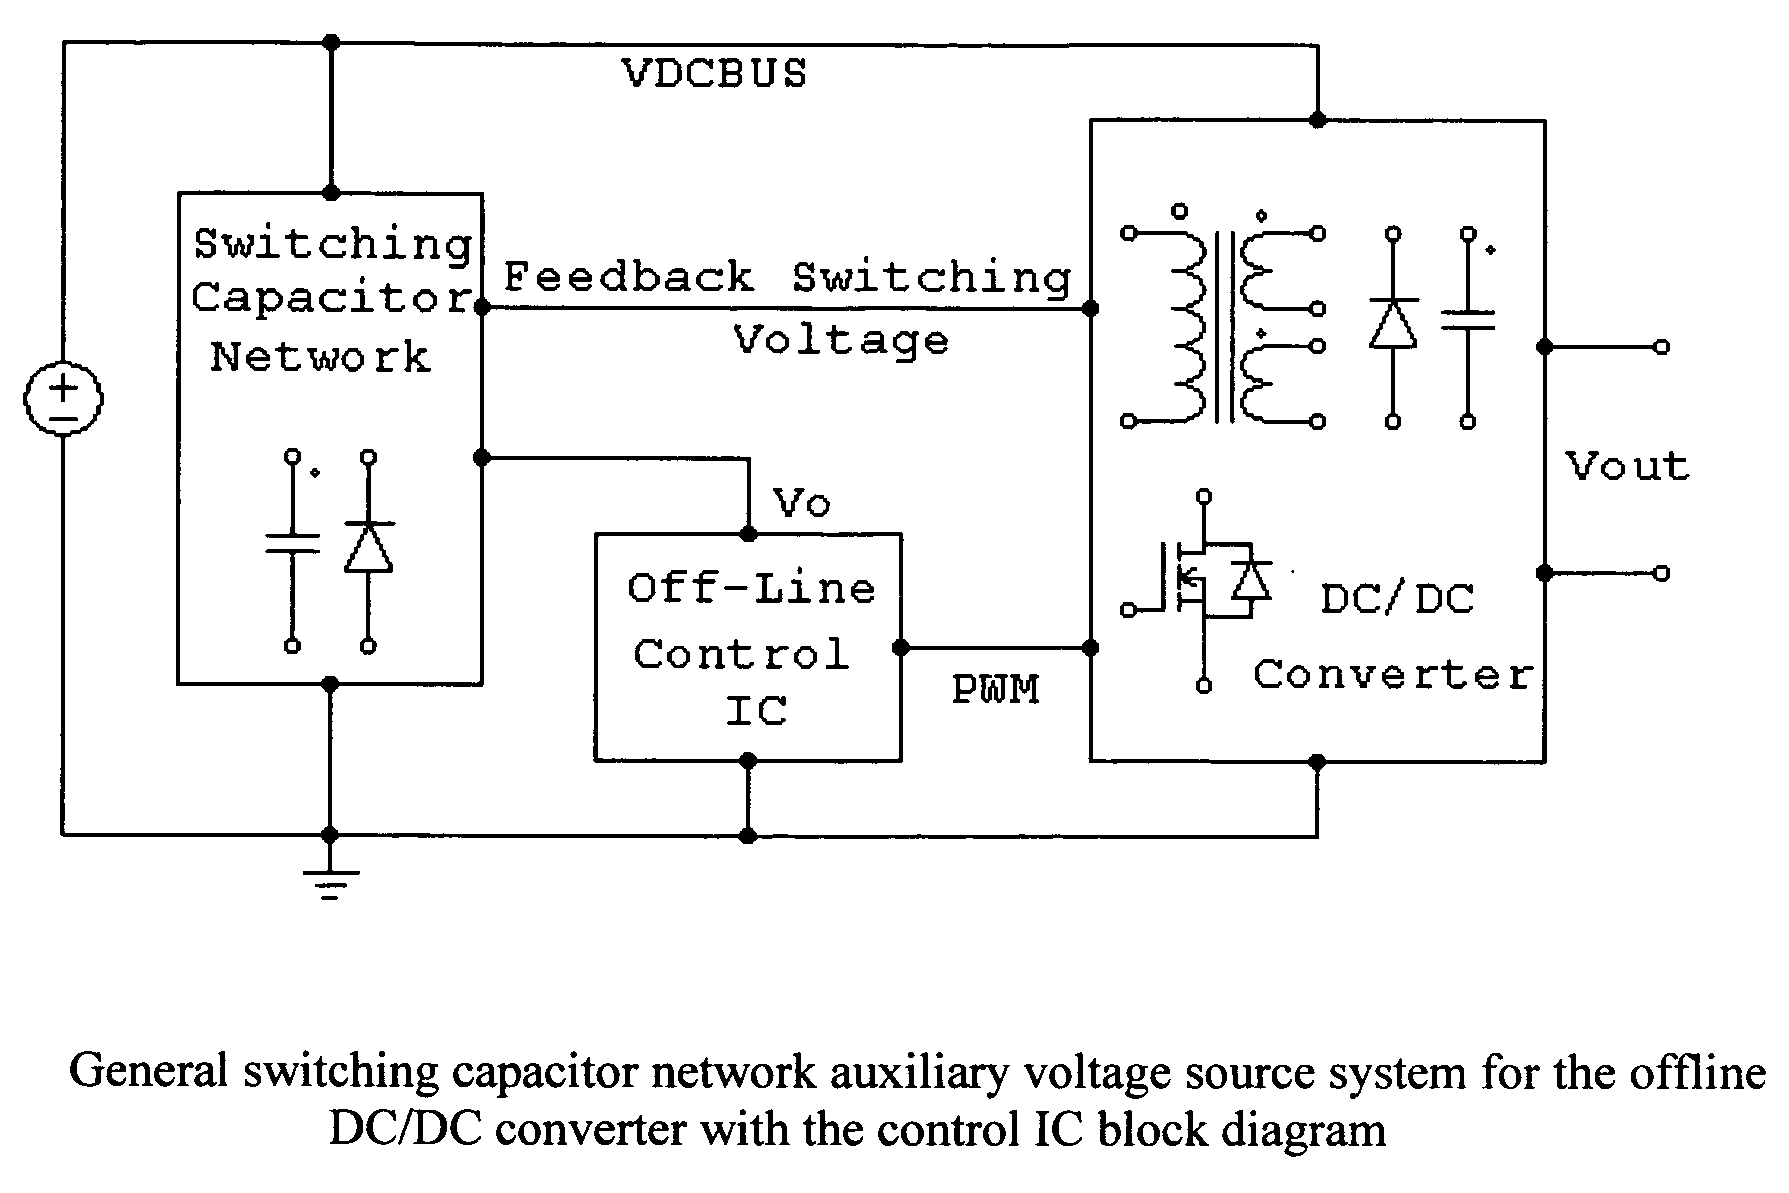 Passive switching capacitor network auxiliary voltage source for off-line IC chip and additional circuits